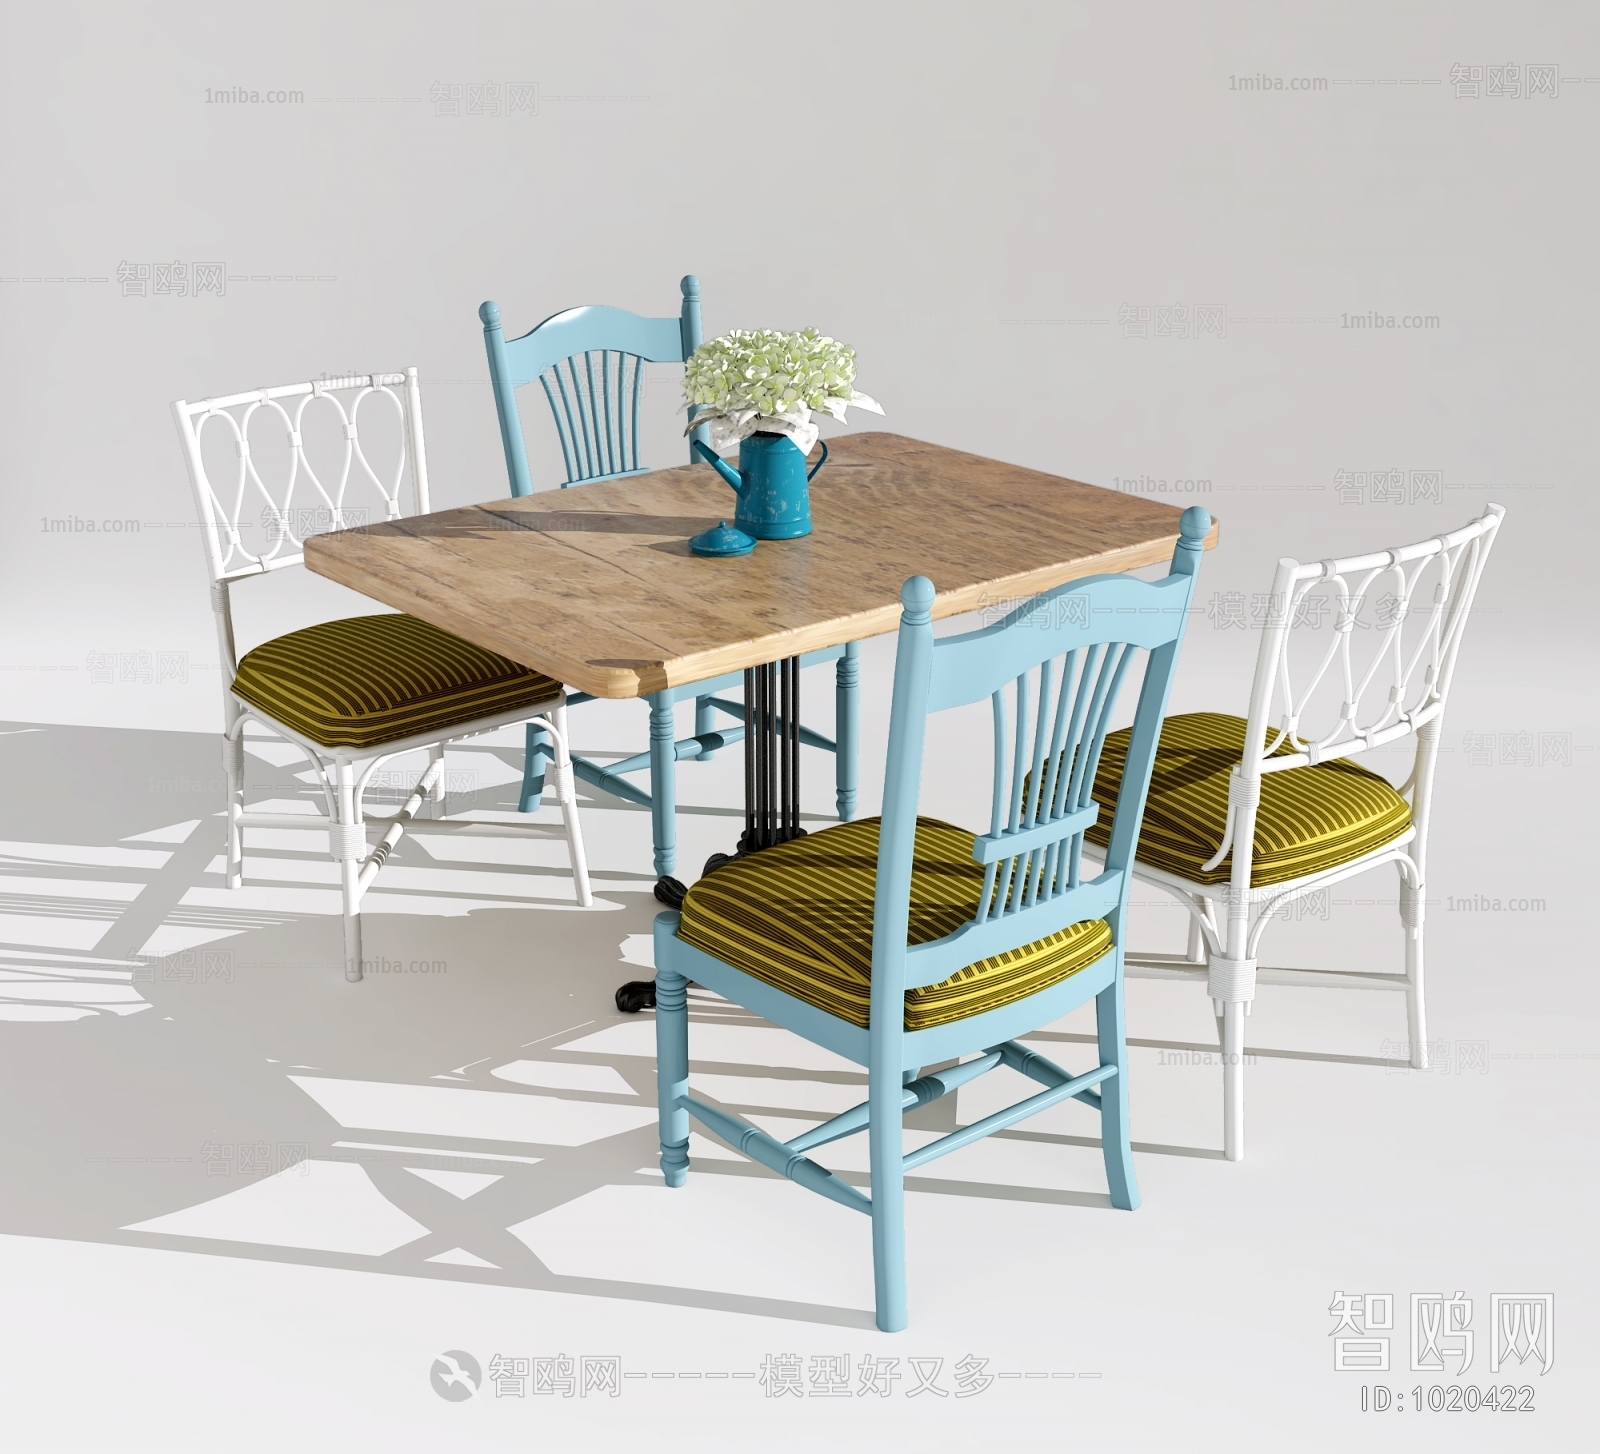 Mediterranean Style Dining Table And Chairs